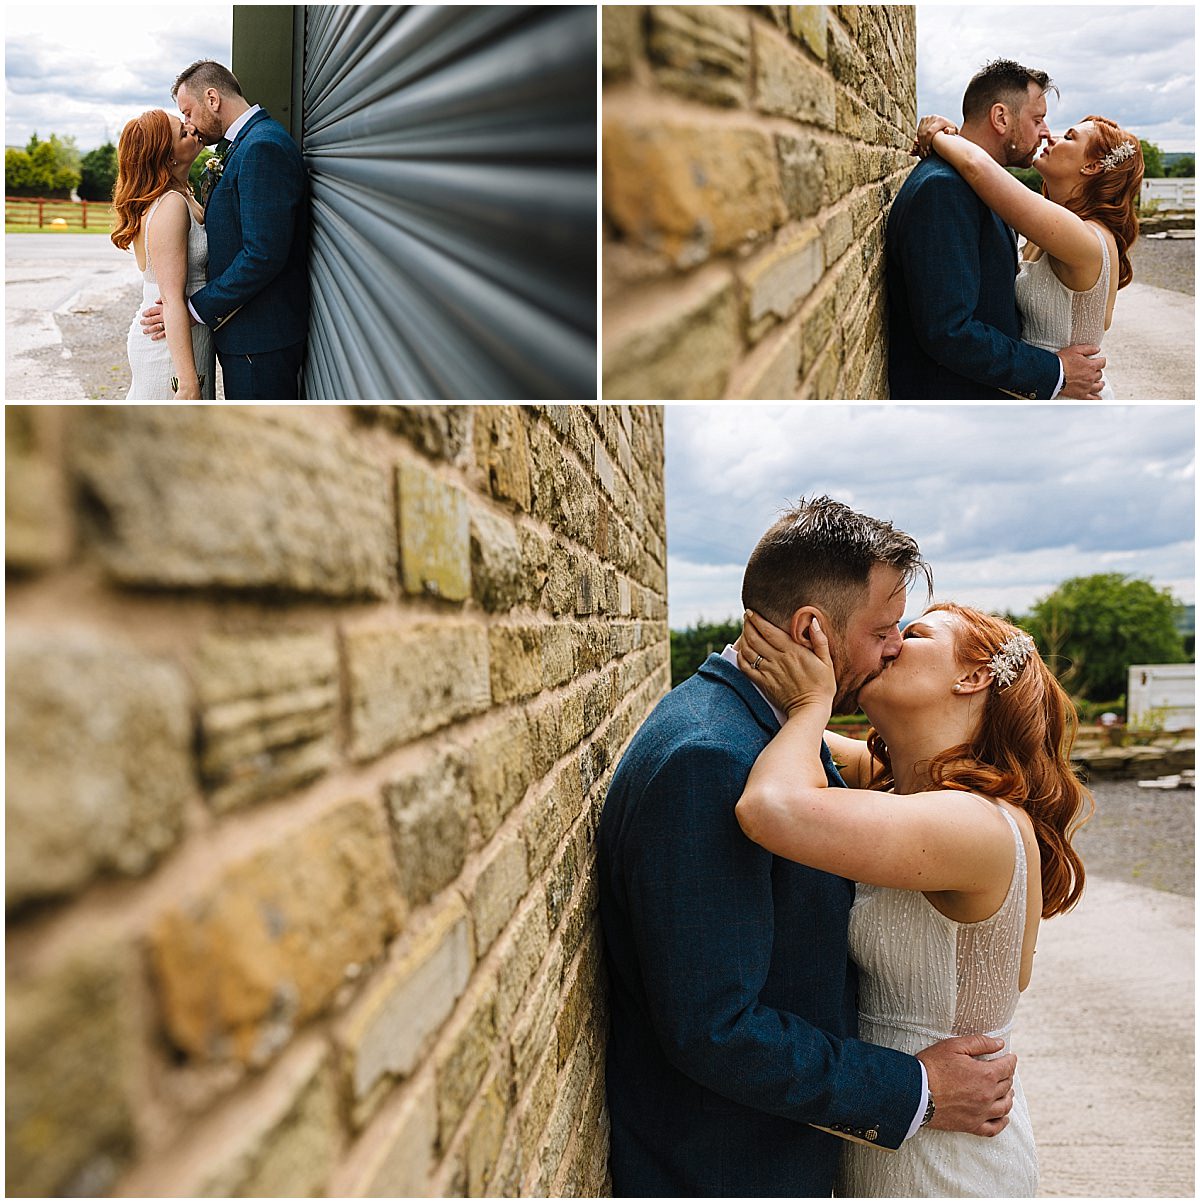 super relaxed wedding portraits at the wellbeing farm